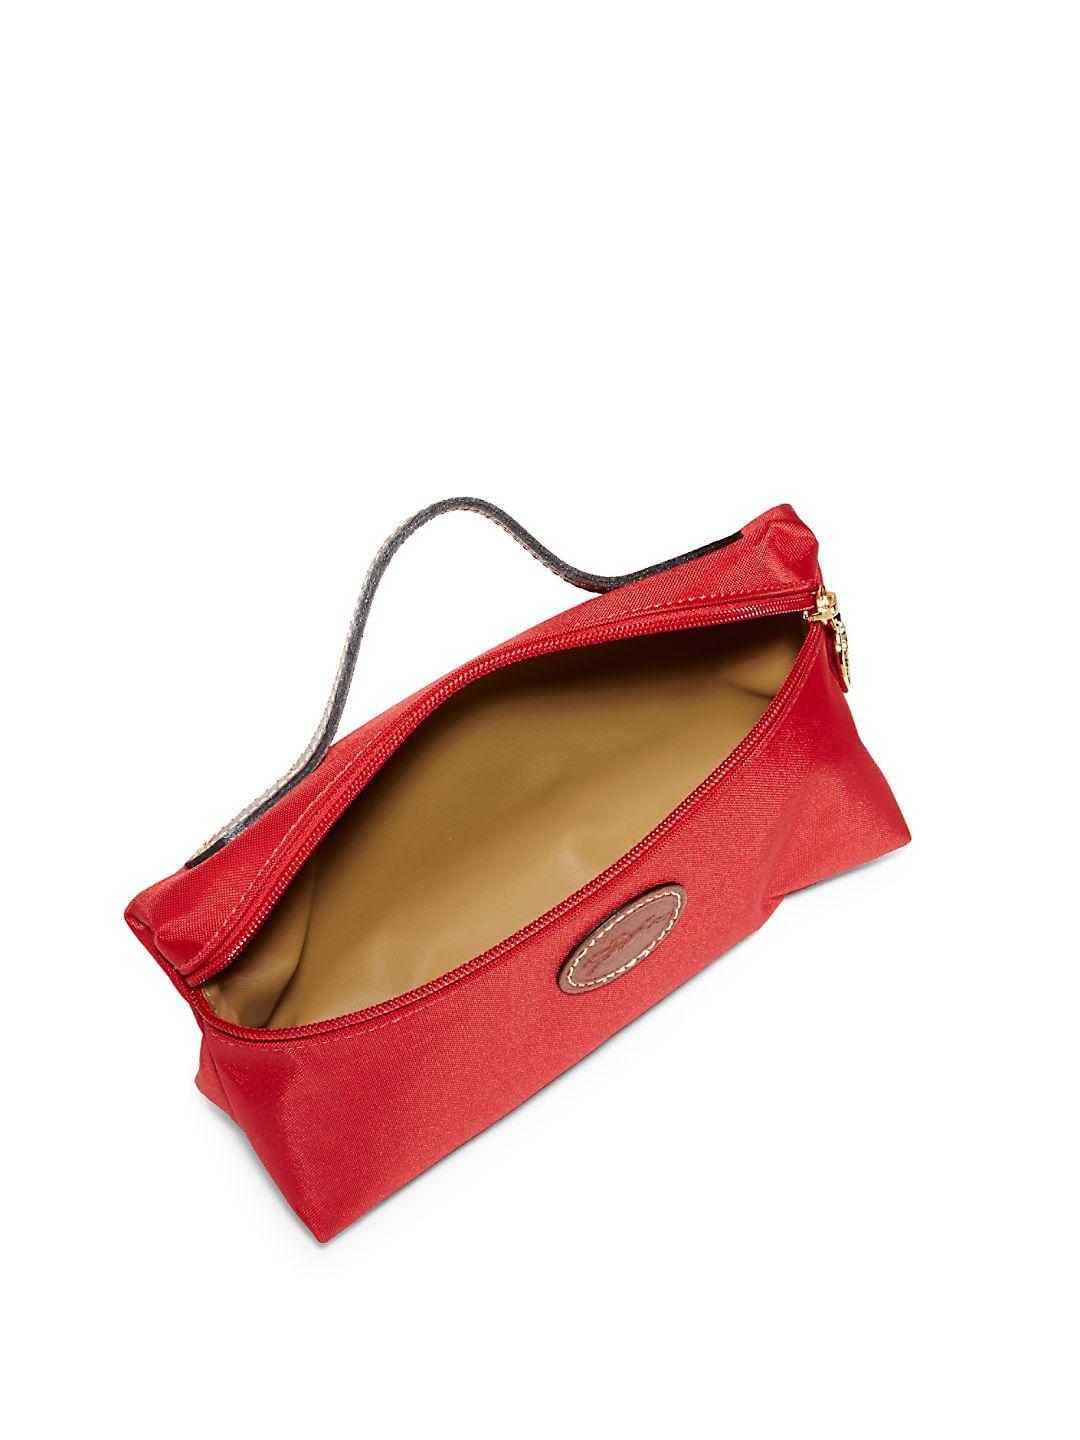 Longchamp Synthetic Le Pliage Pochette Bag in Red - Lyst